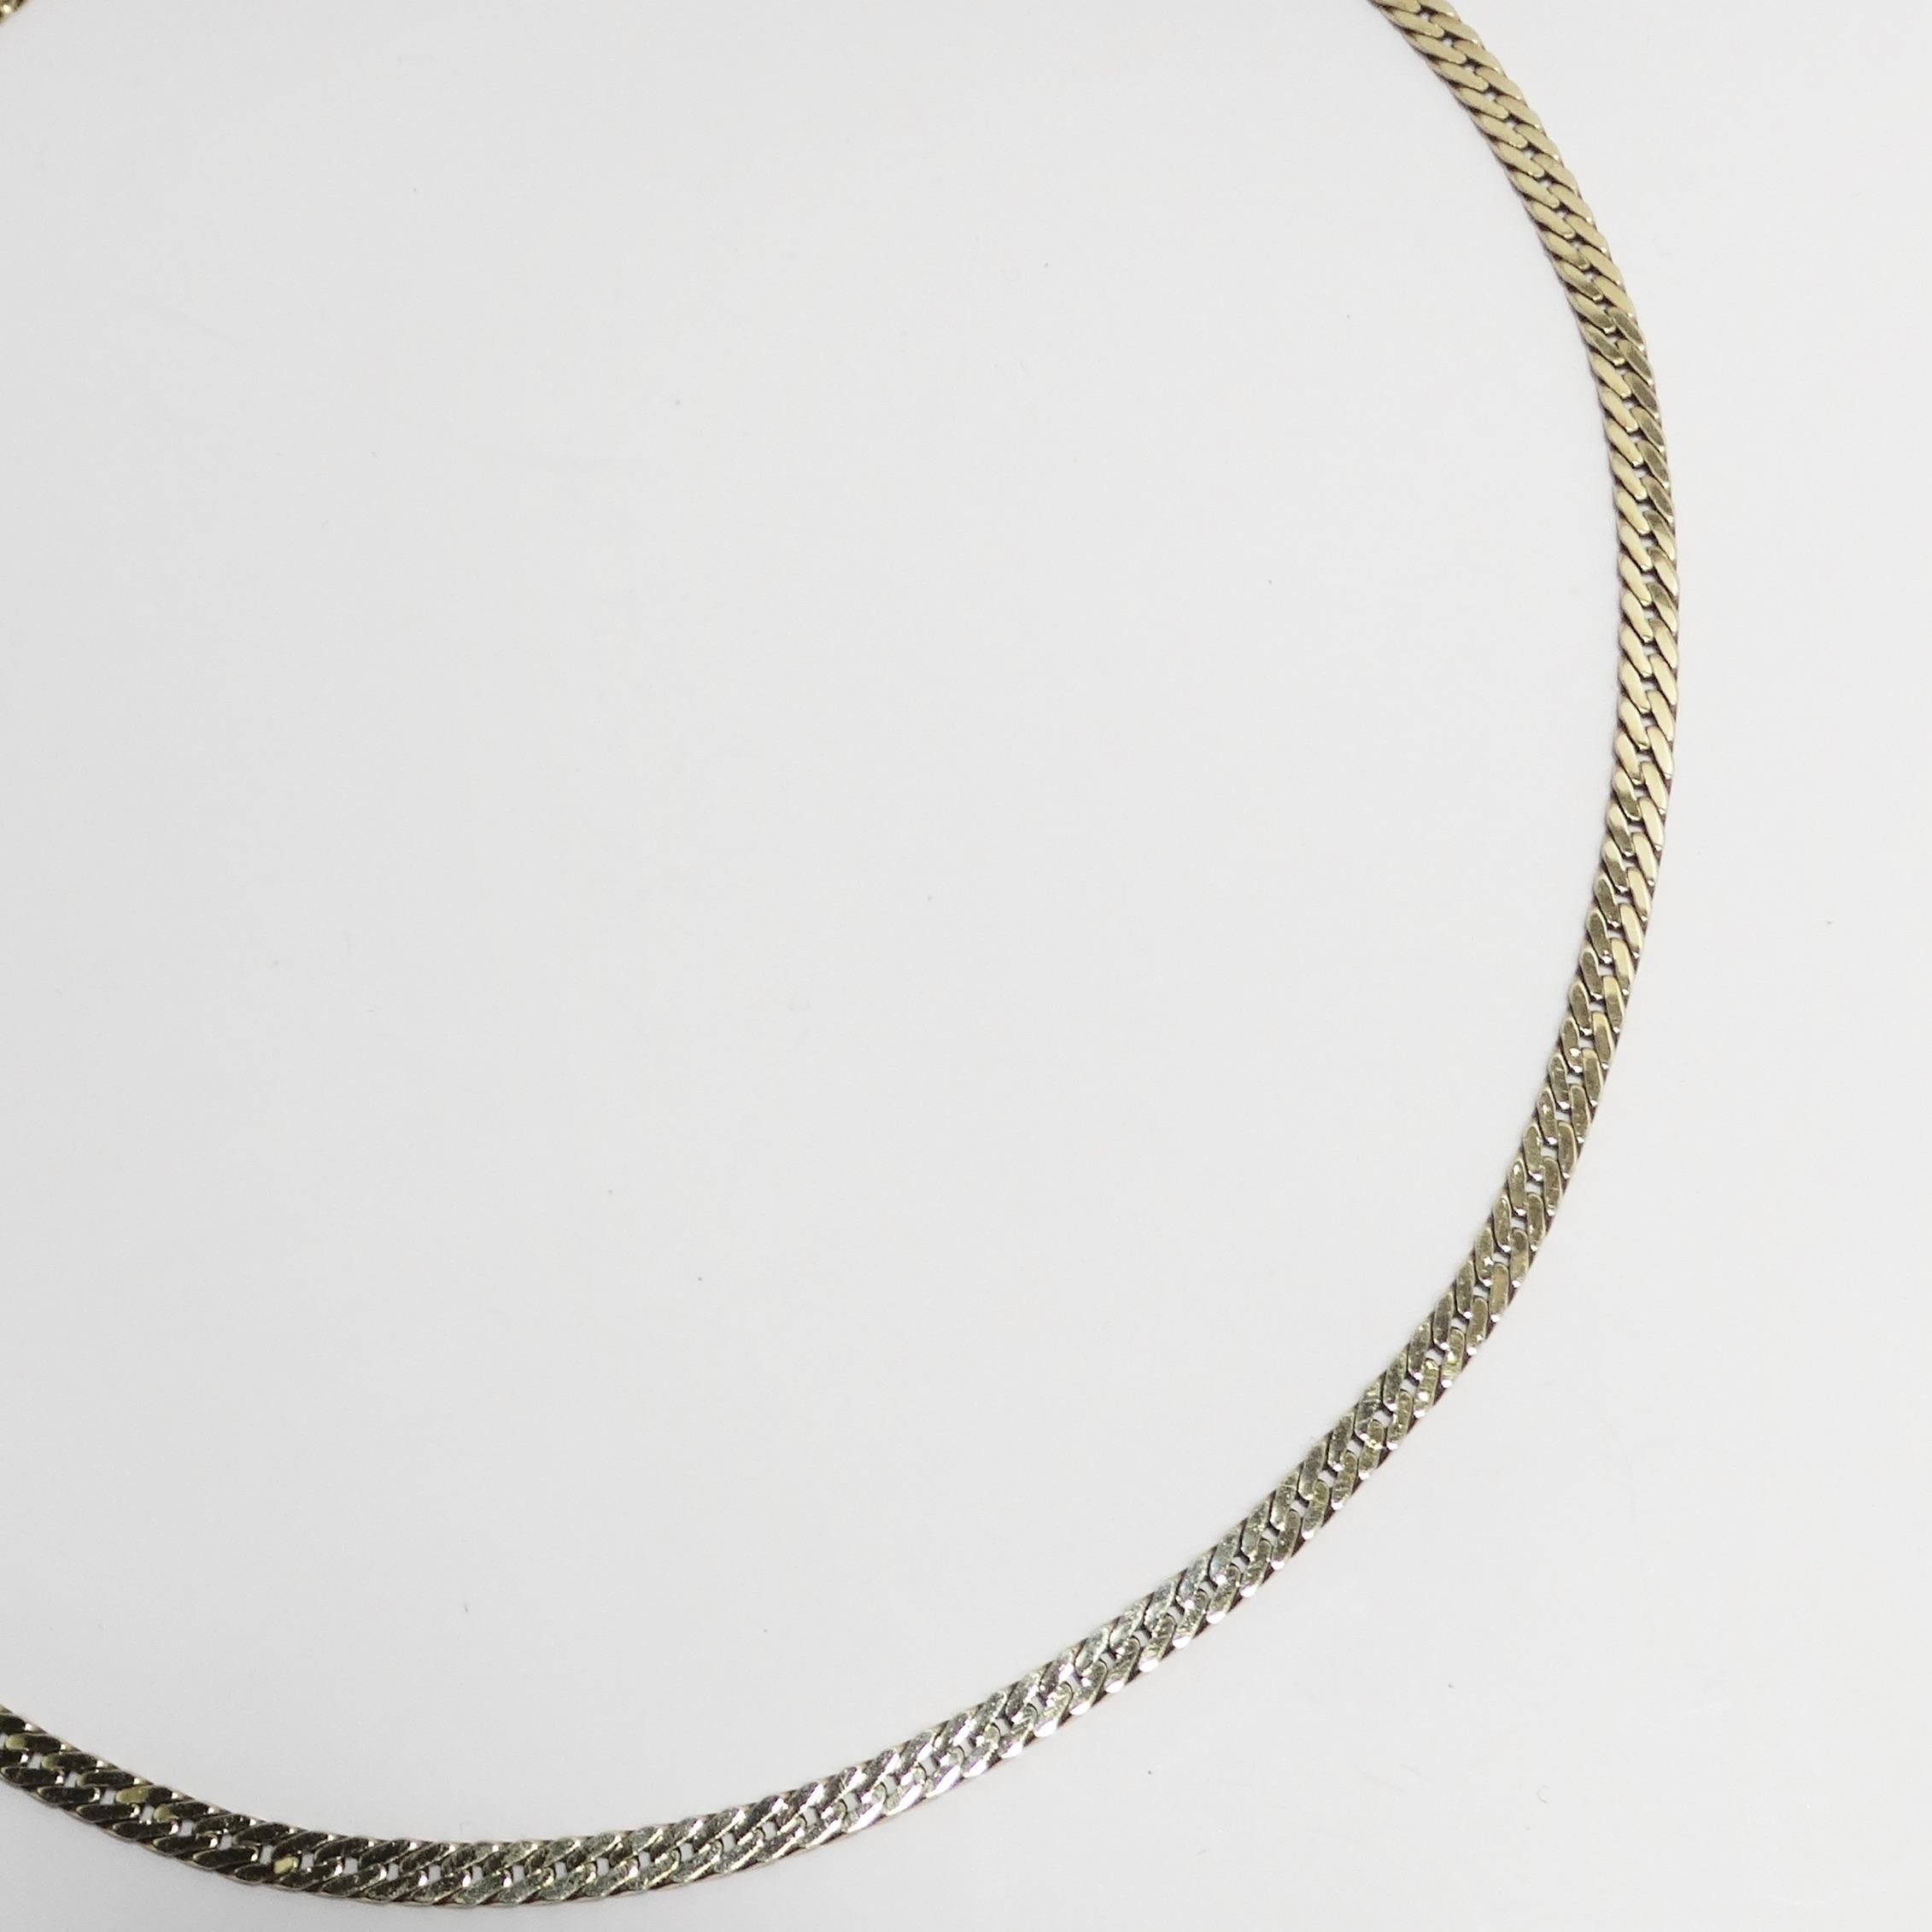 Women's or Men's 14K Solid Gold 1980s Chain Necklace